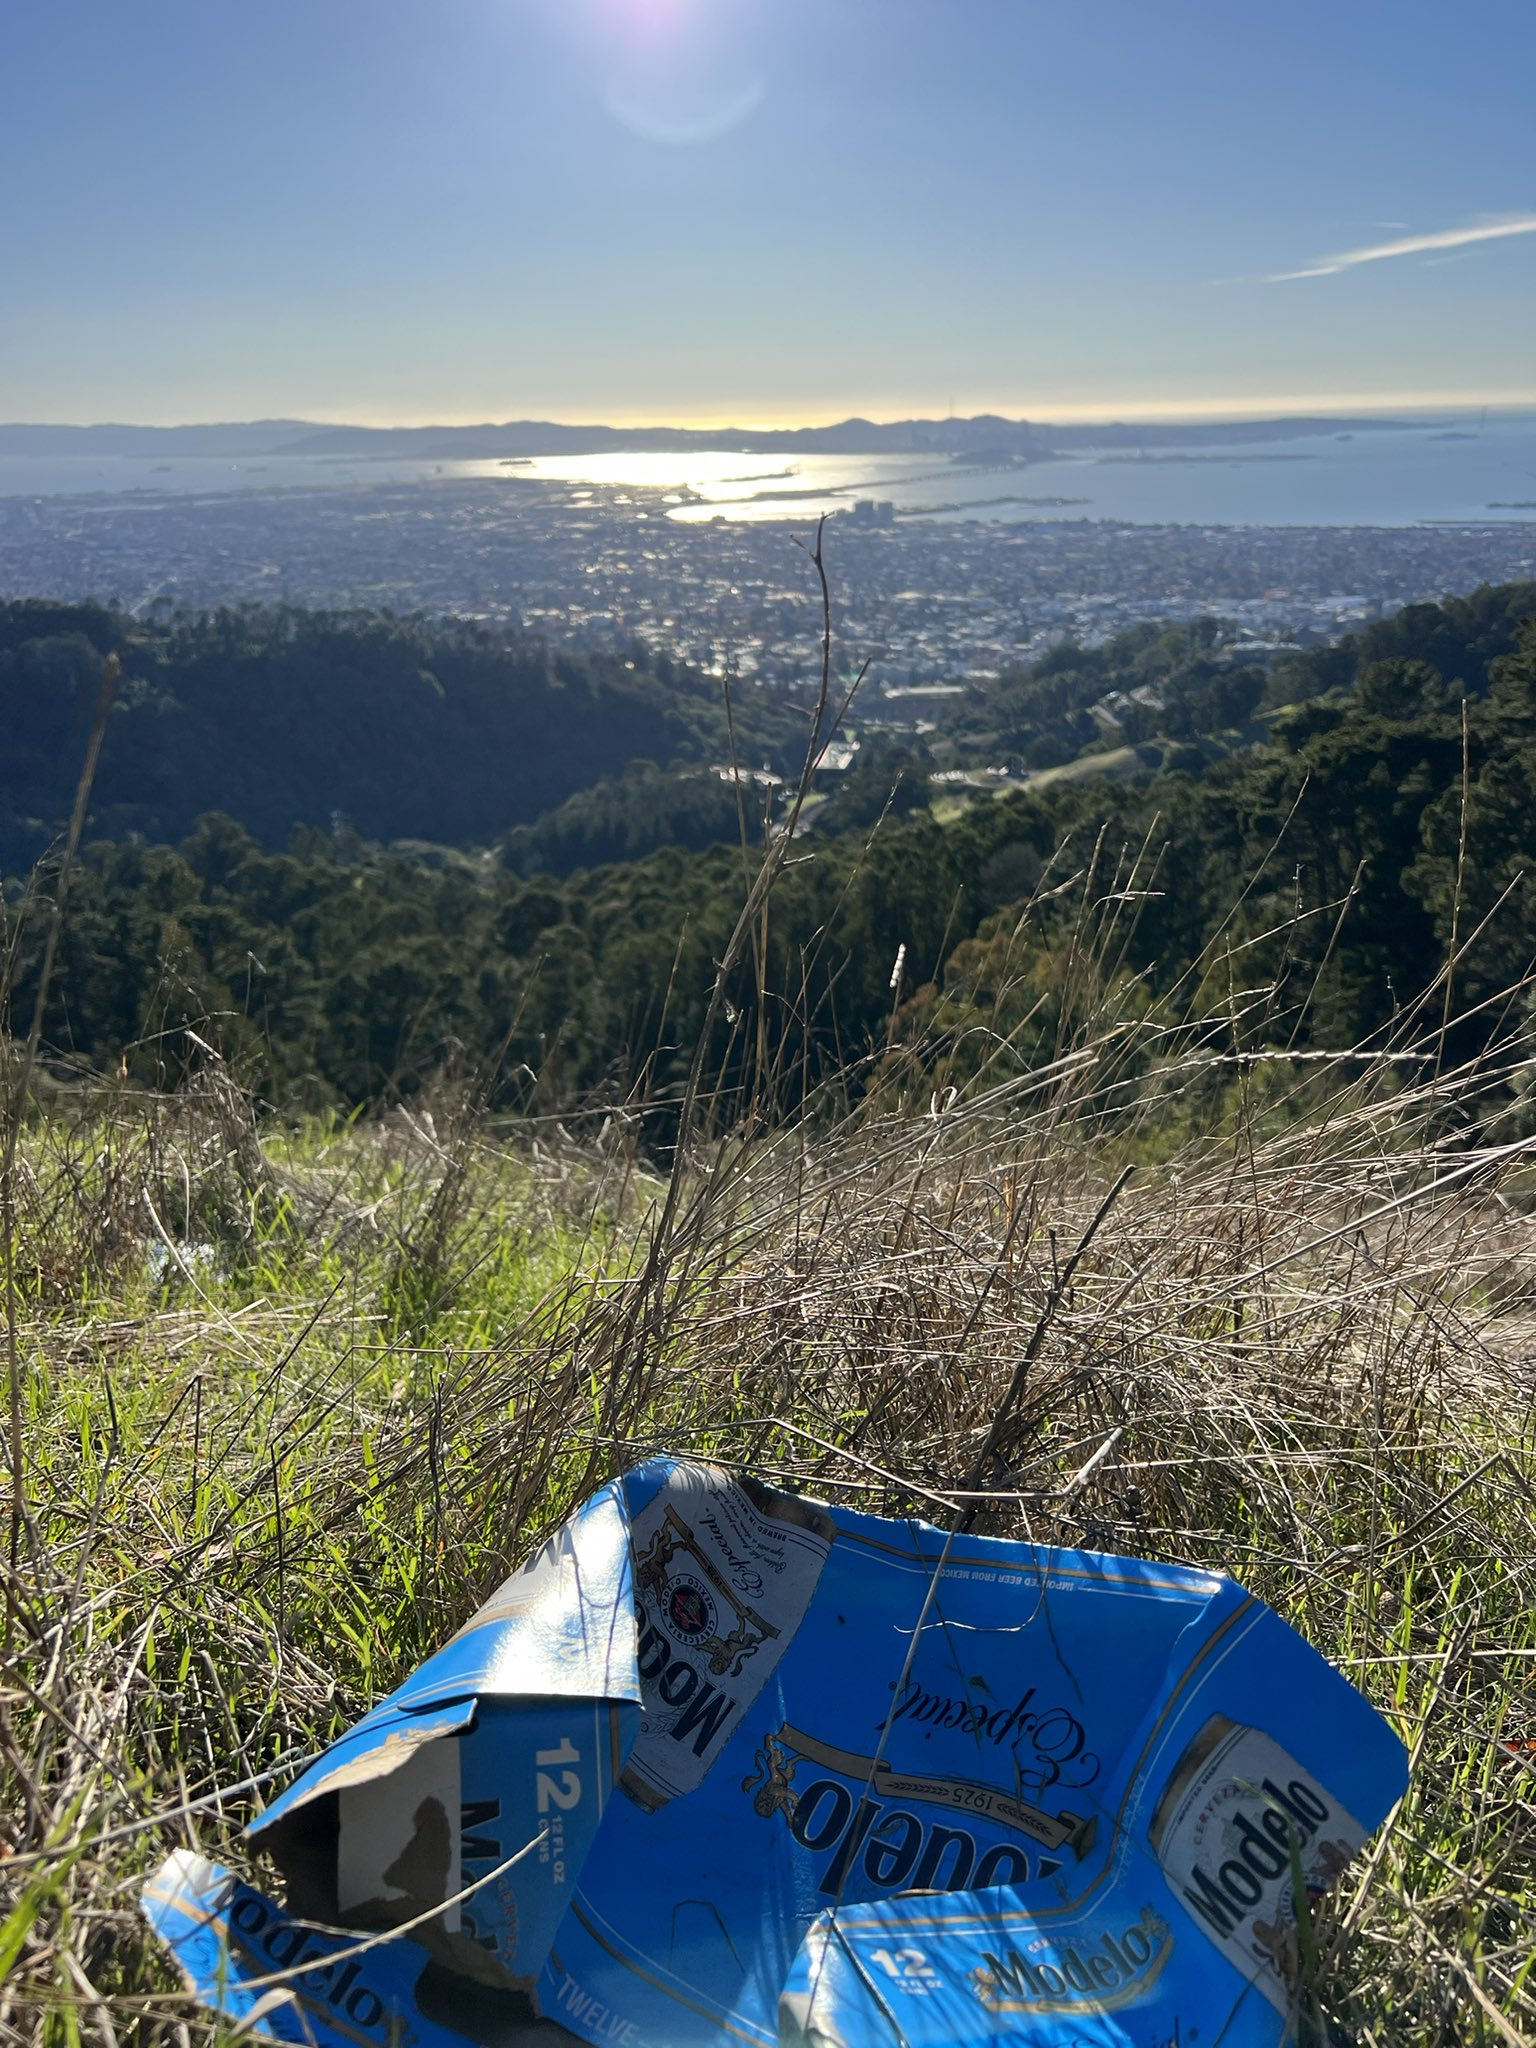 Behind the efforts to rid Grizzly Peak of its litter